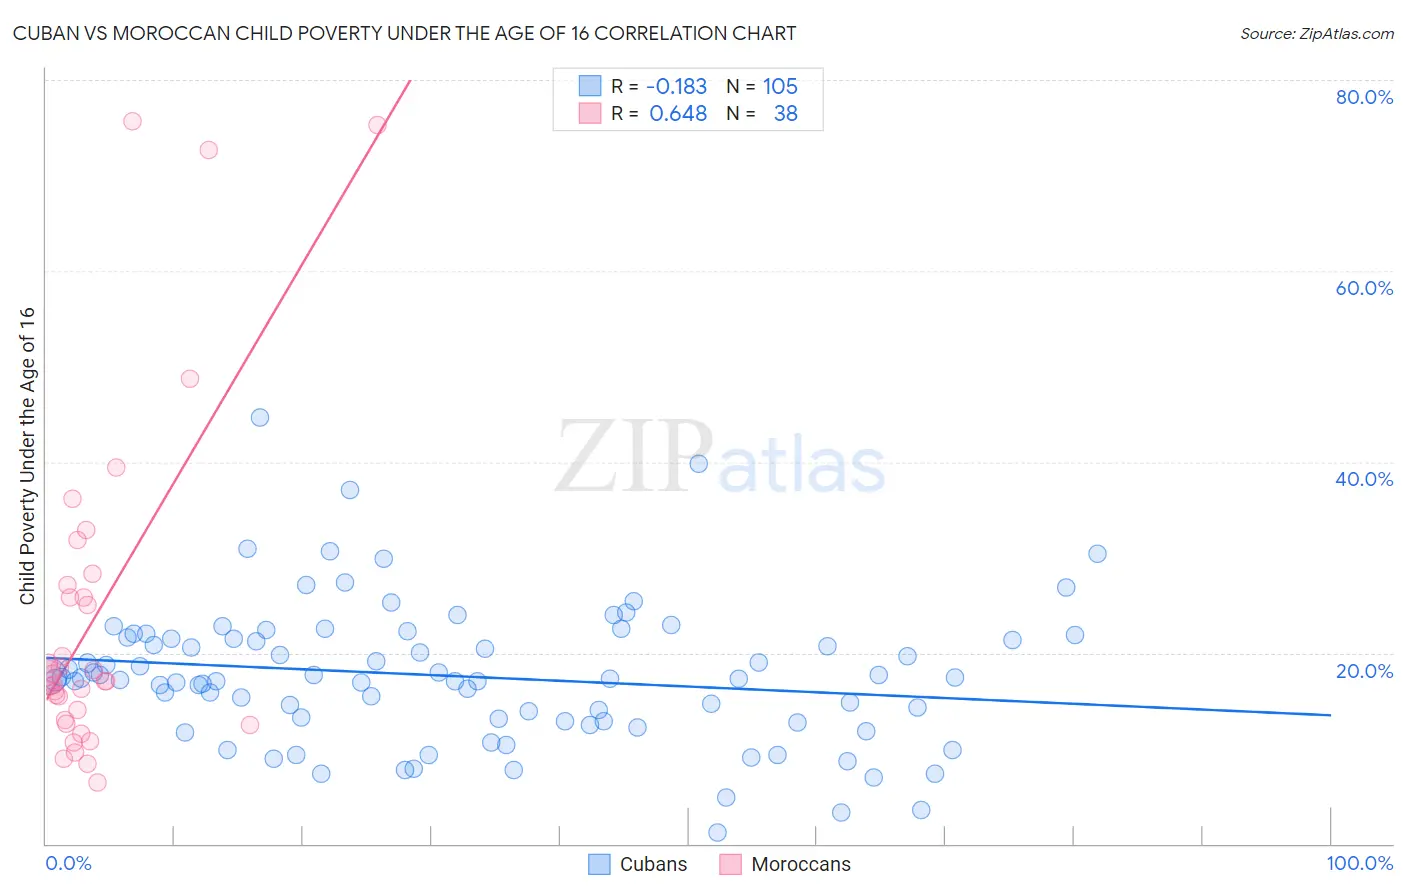 Cuban vs Moroccan Child Poverty Under the Age of 16